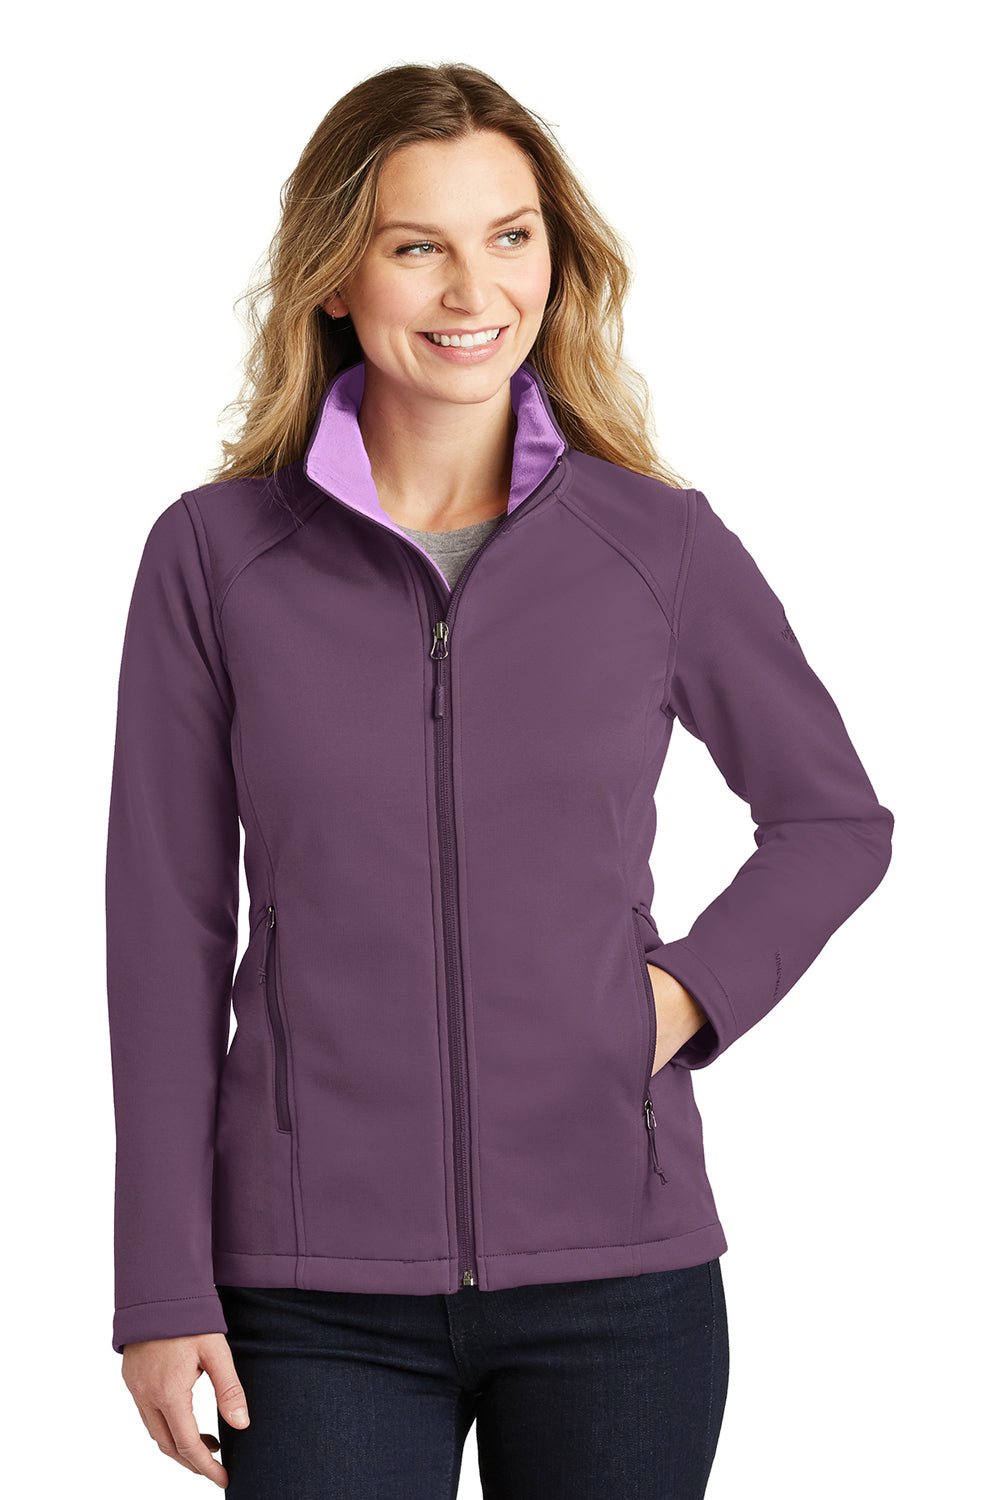 The North Face NF0A3LGY Womens Ridgeline Wind & Water Resistant Full Zip Jacket Blackberry Purple Front